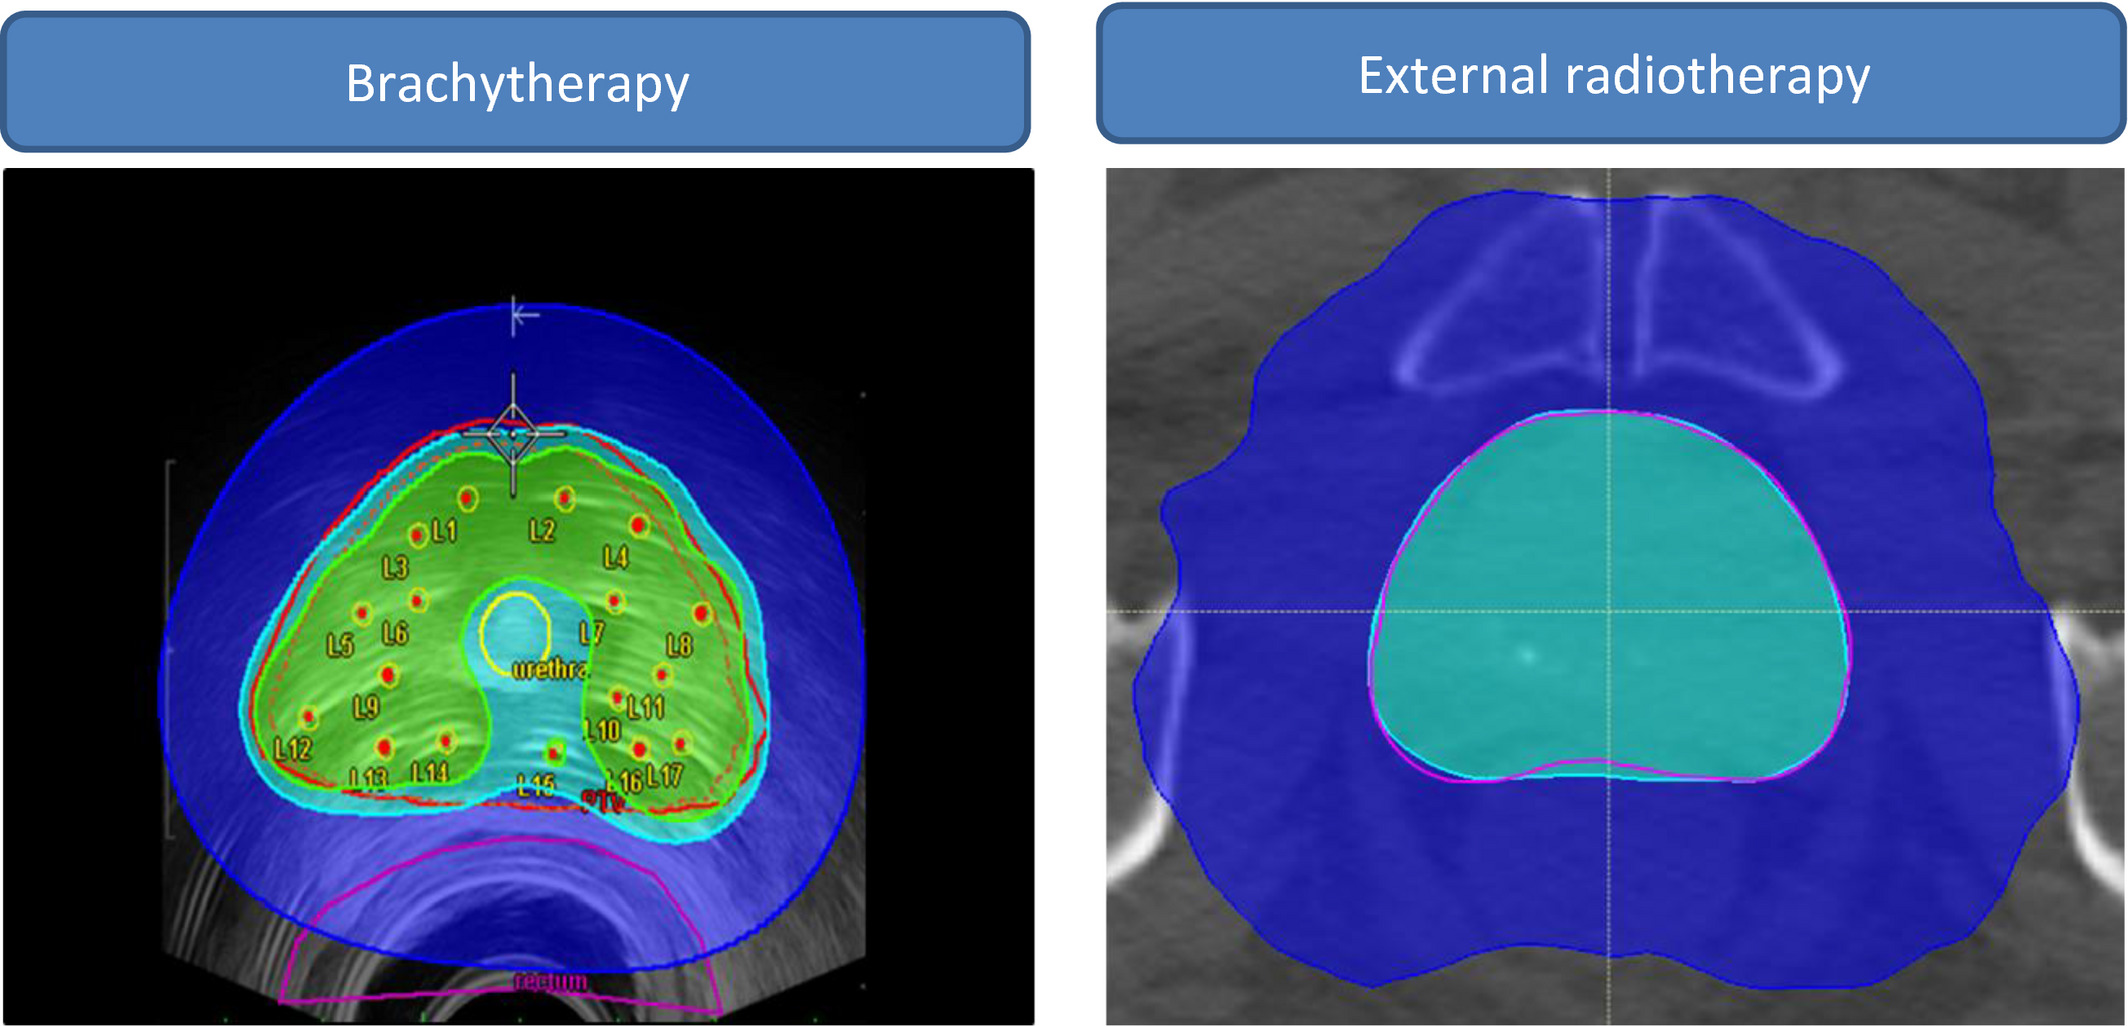 Focused radiation: Brachytherapy's localized approach to cancer therapy